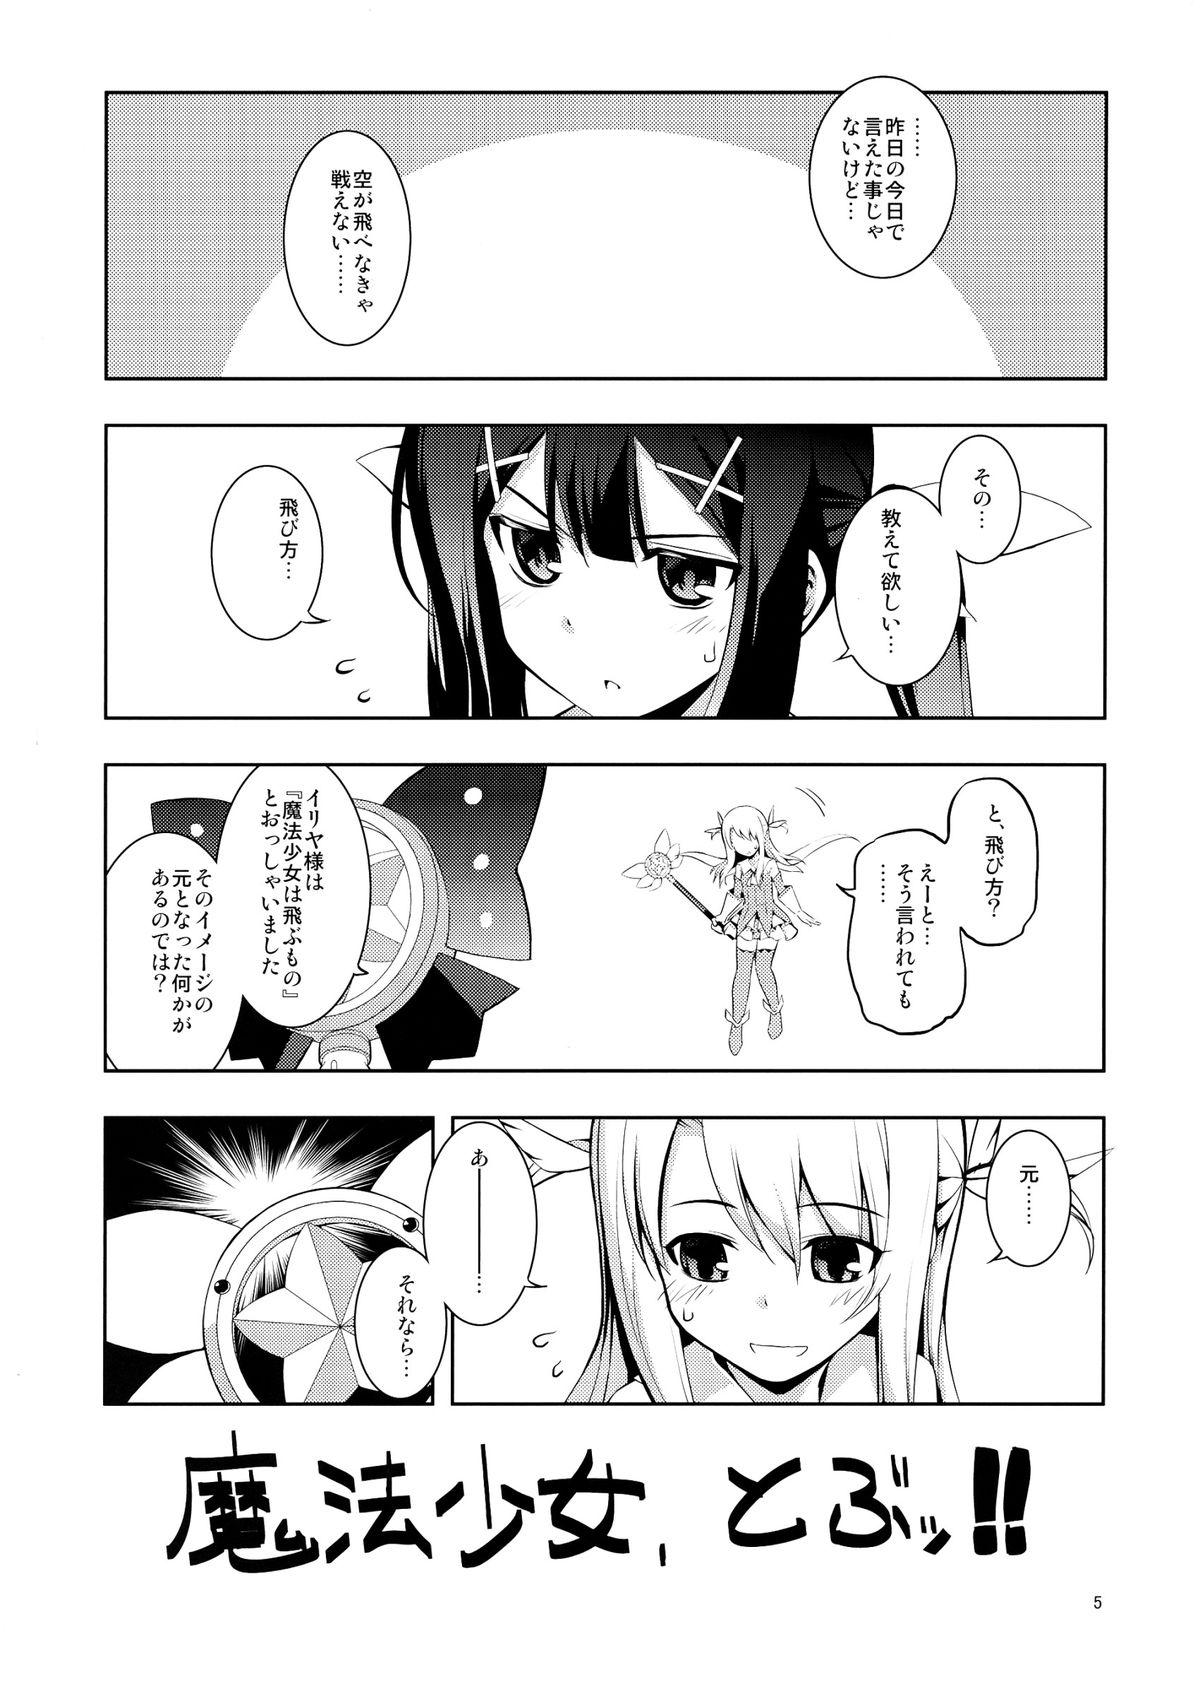 Tinytits RE 18 - Fate kaleid liner prisma illya Moms - Page 5